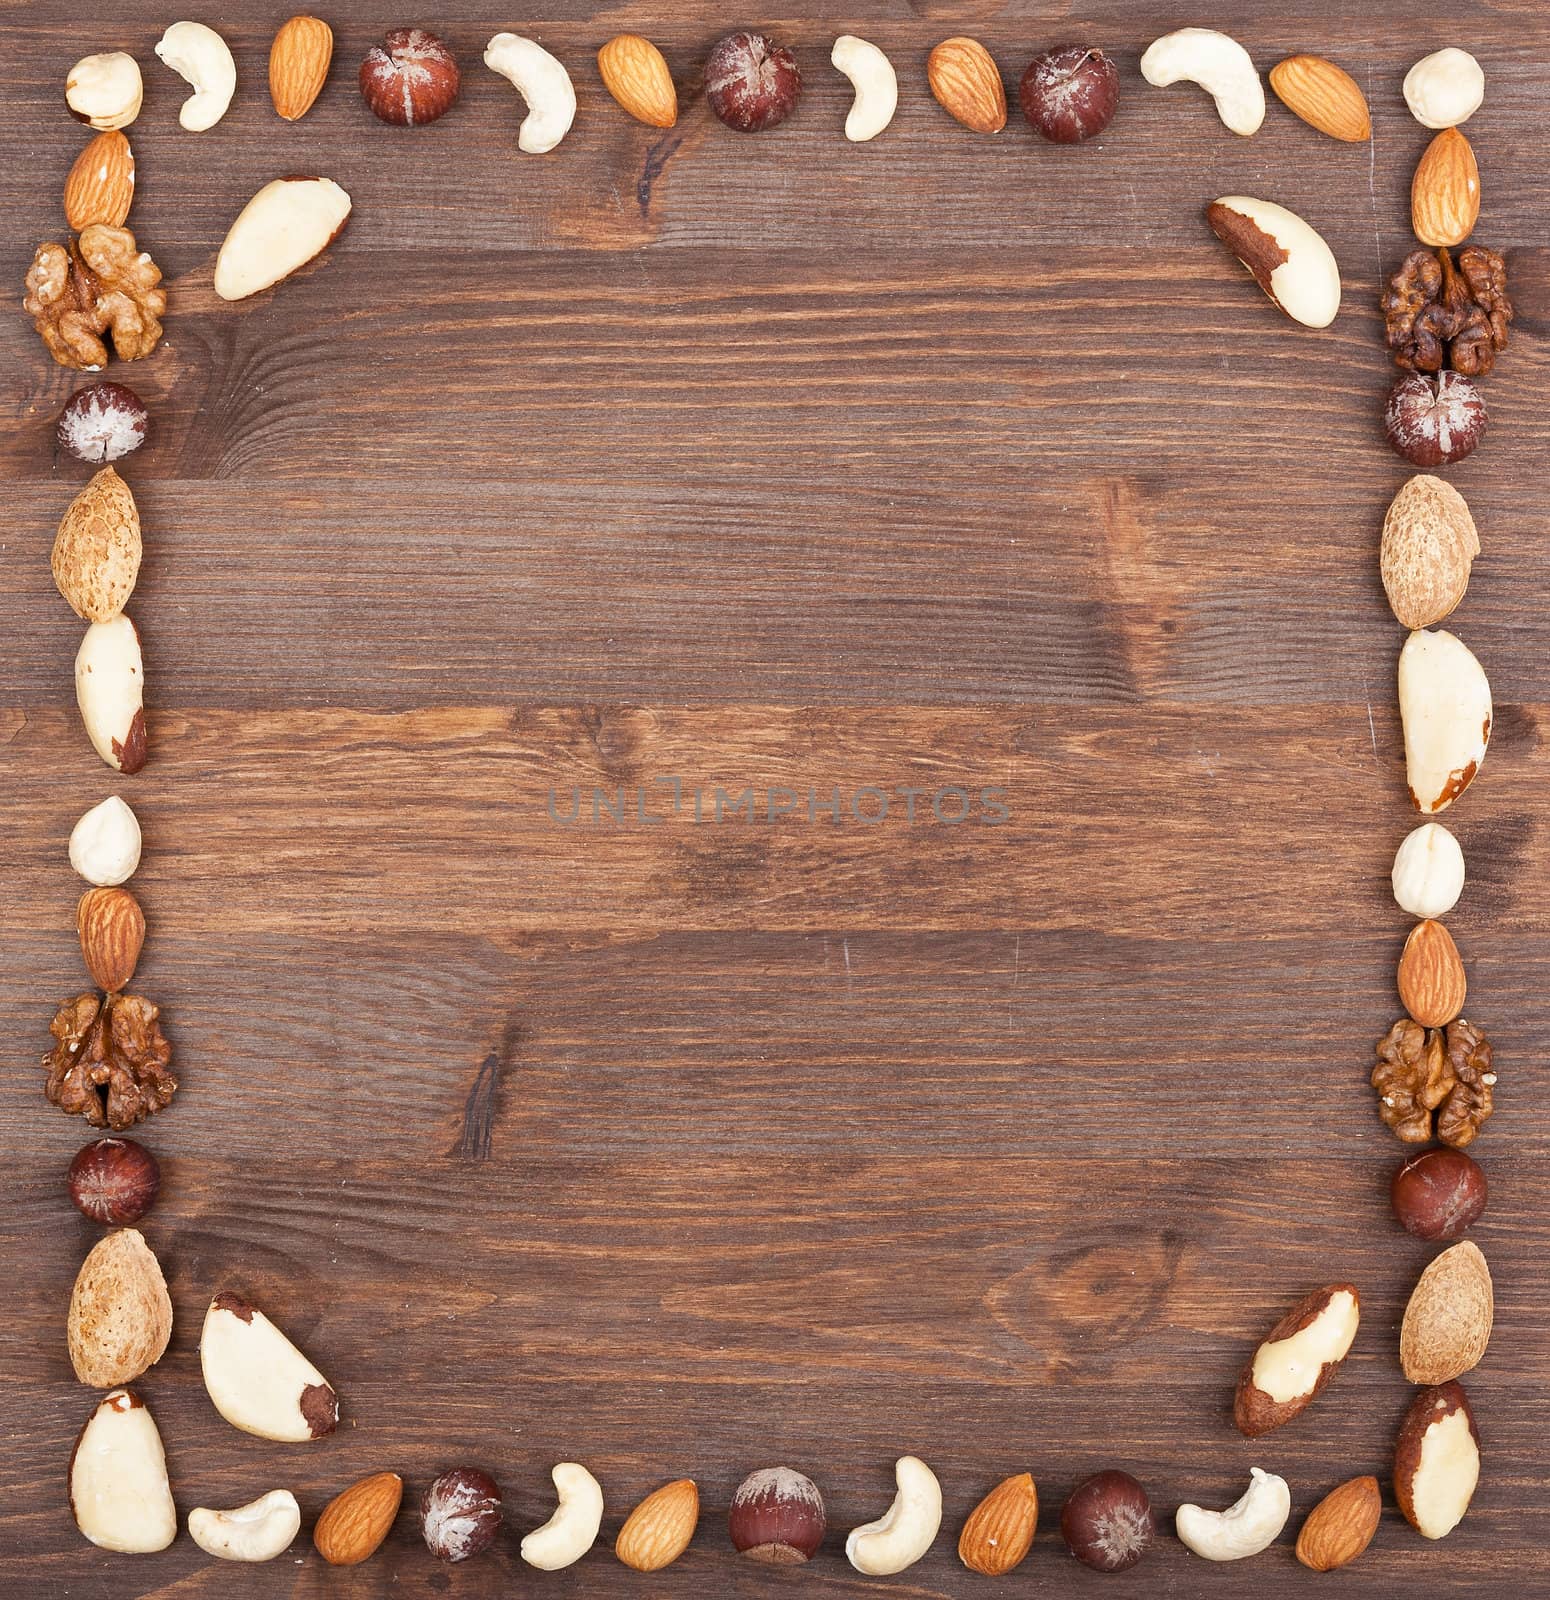 Square frame from different varieties of nuts